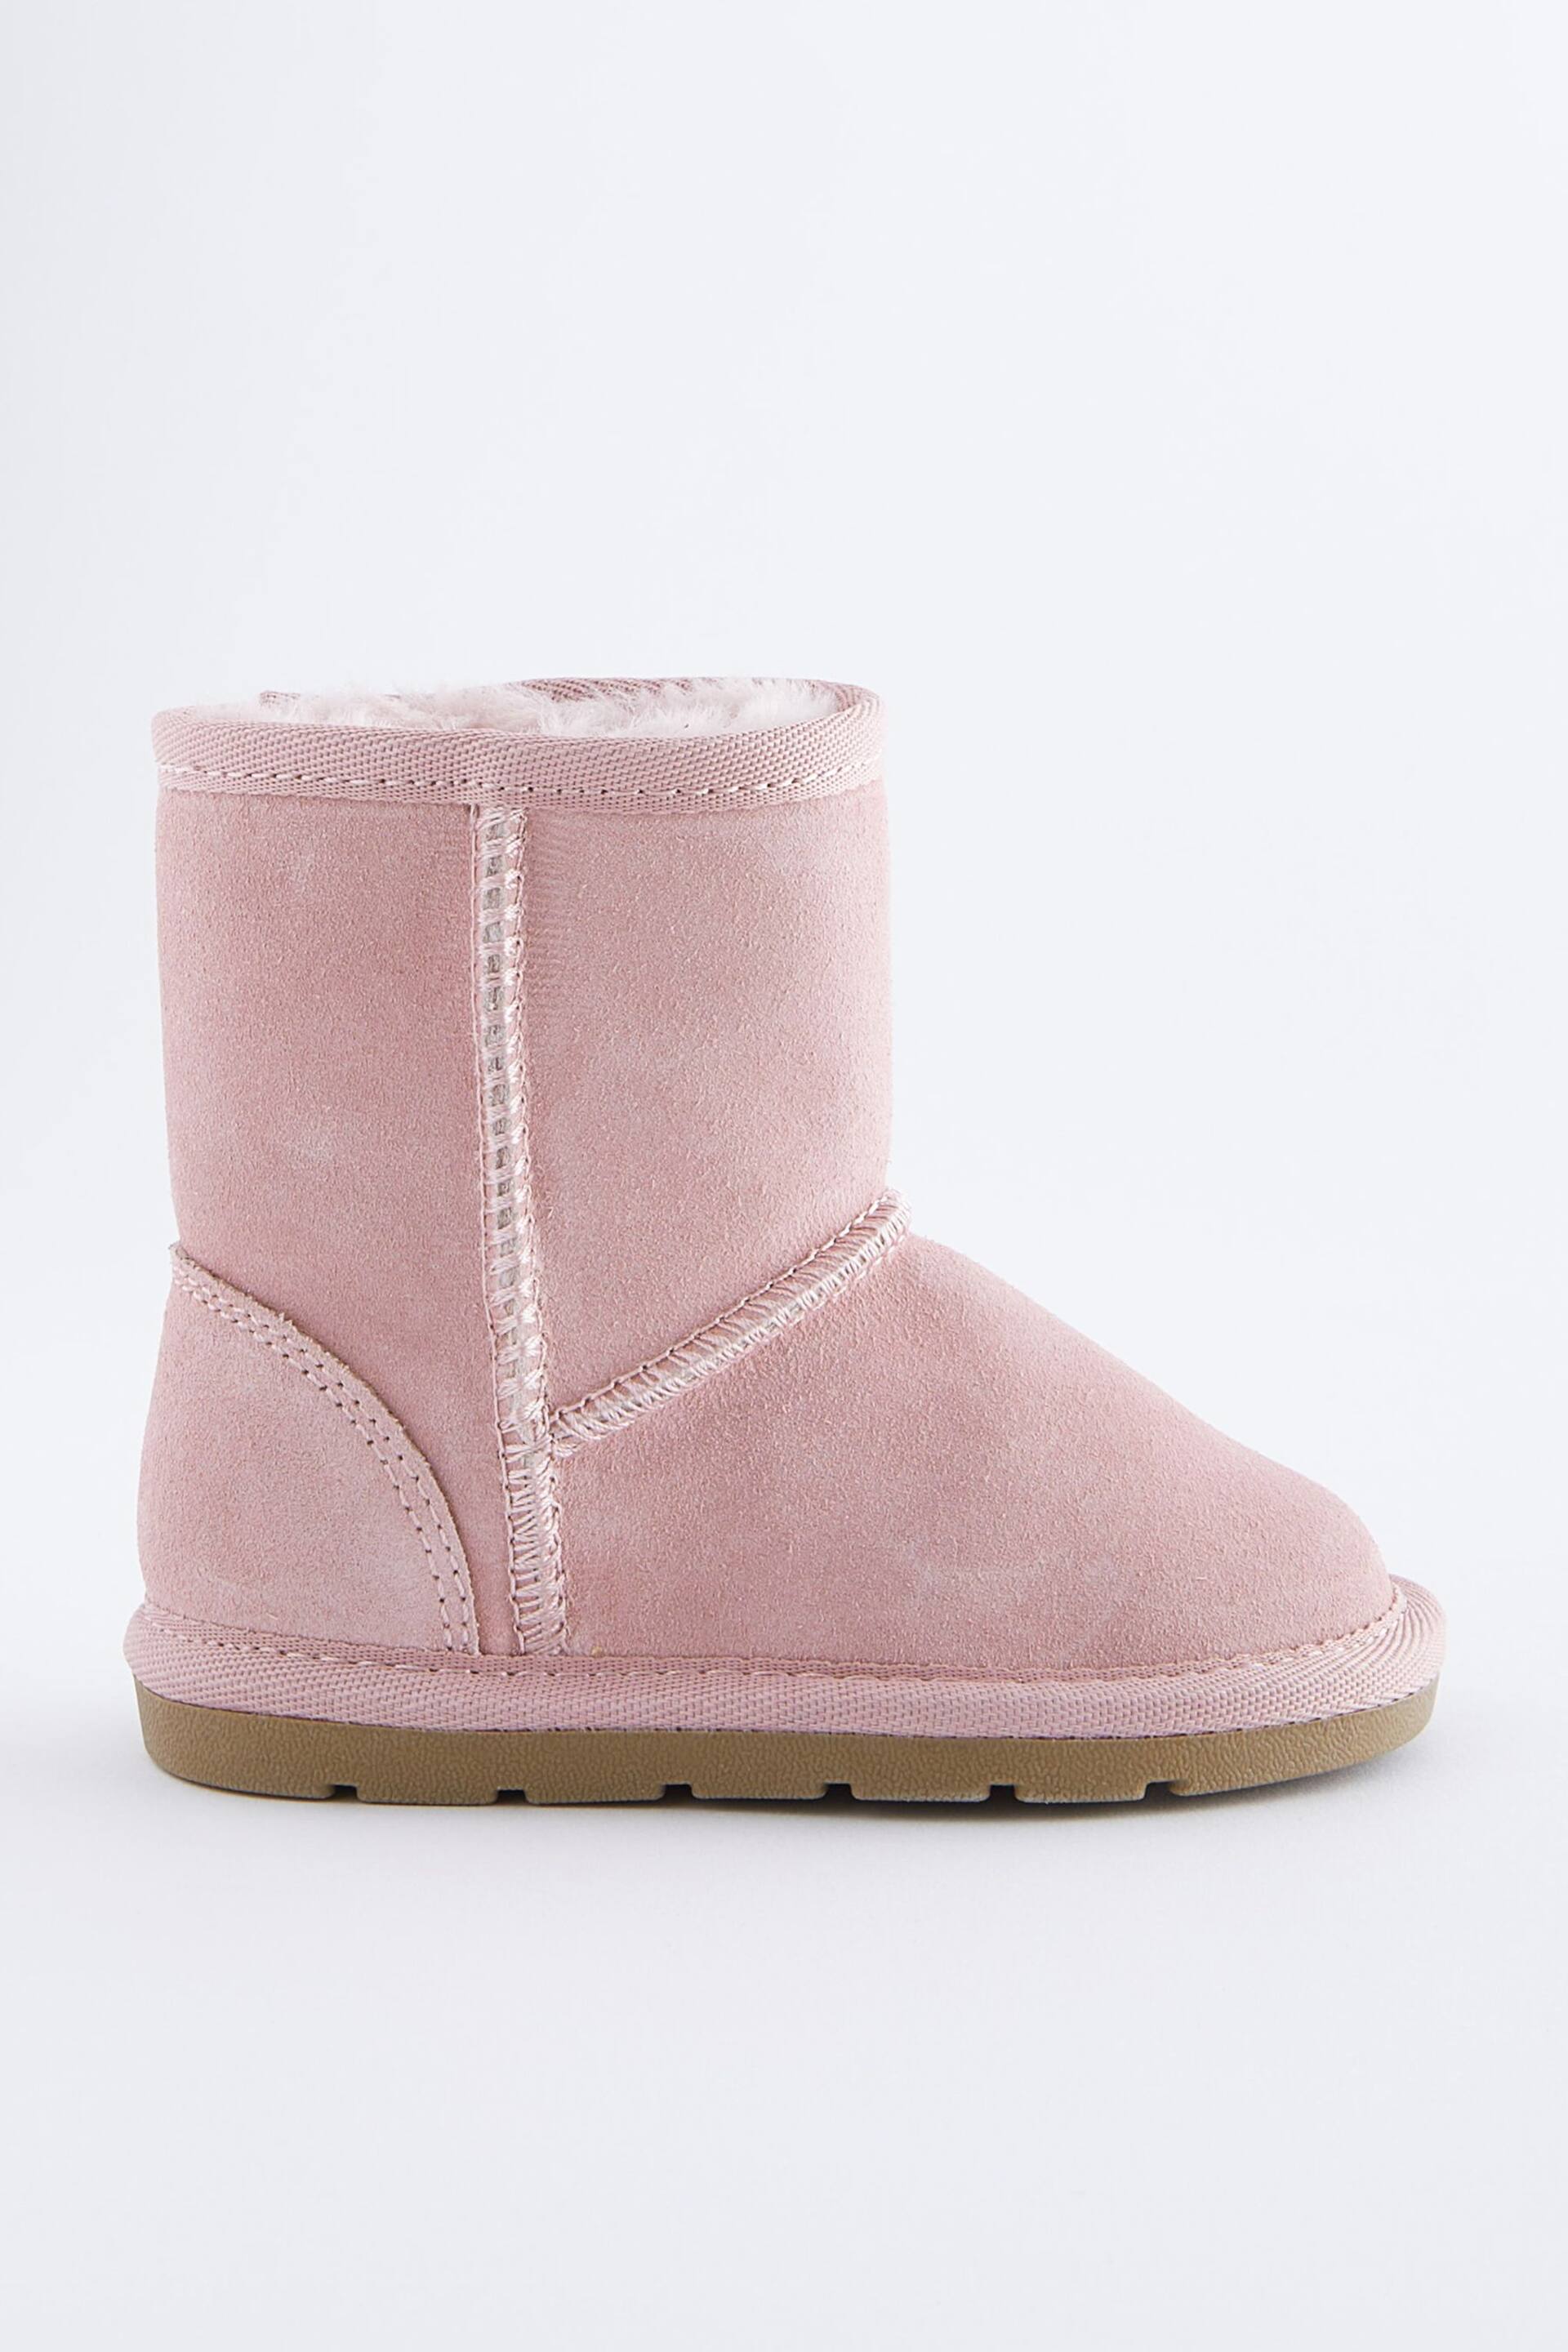 Pink Suede Tall Faux Fur Lined Water Repellent Pull-On Suede Boots - Image 4 of 7